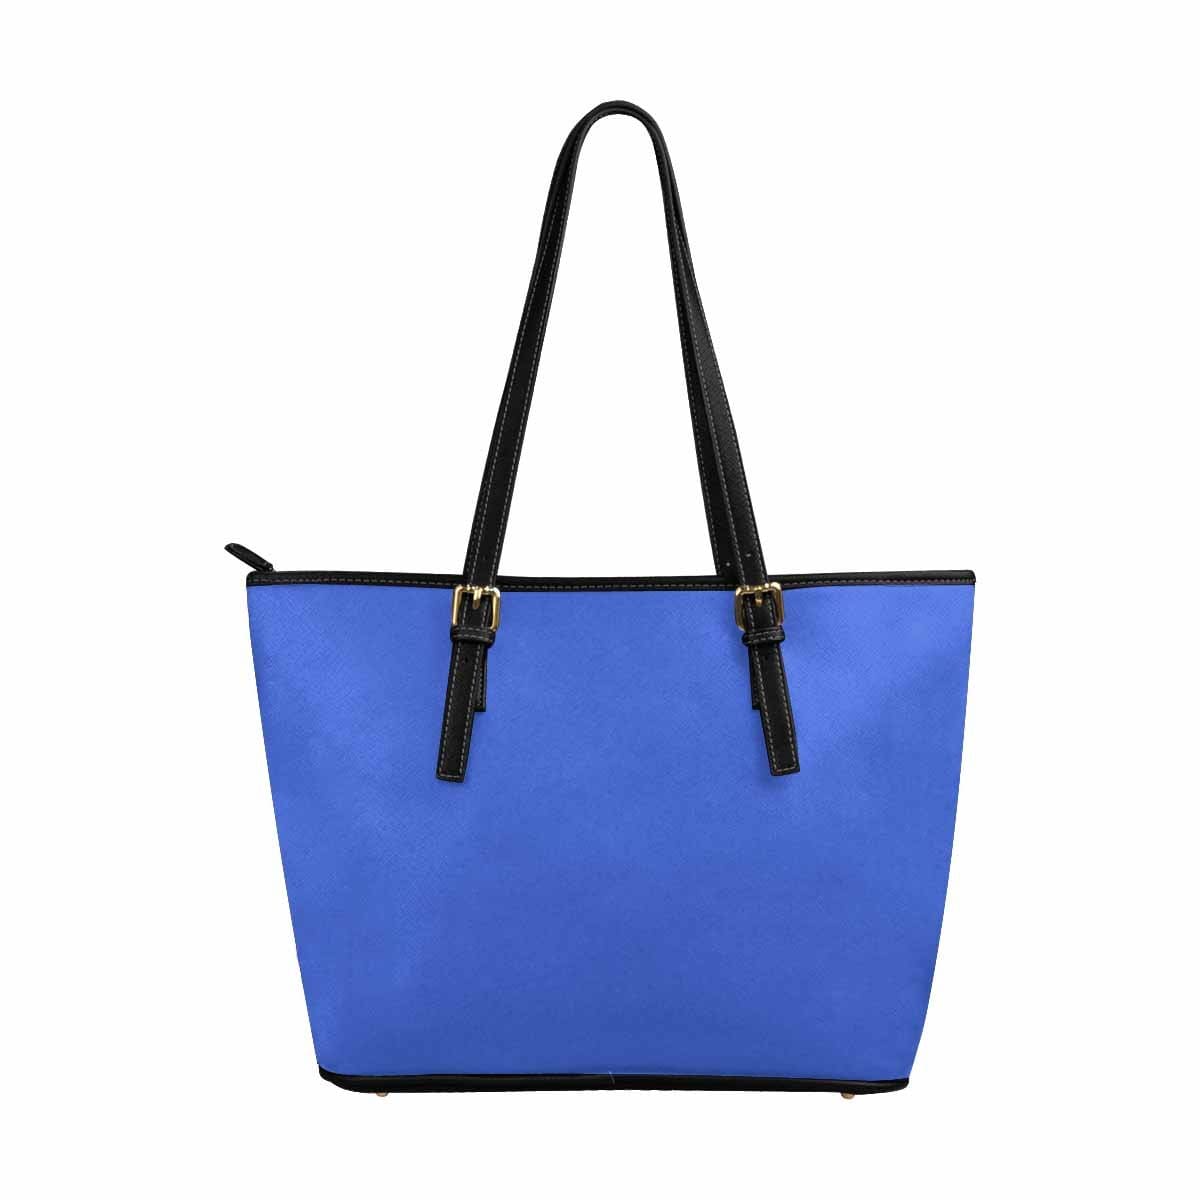 Royal Blue - Large Leather Tote Bag with Zipper